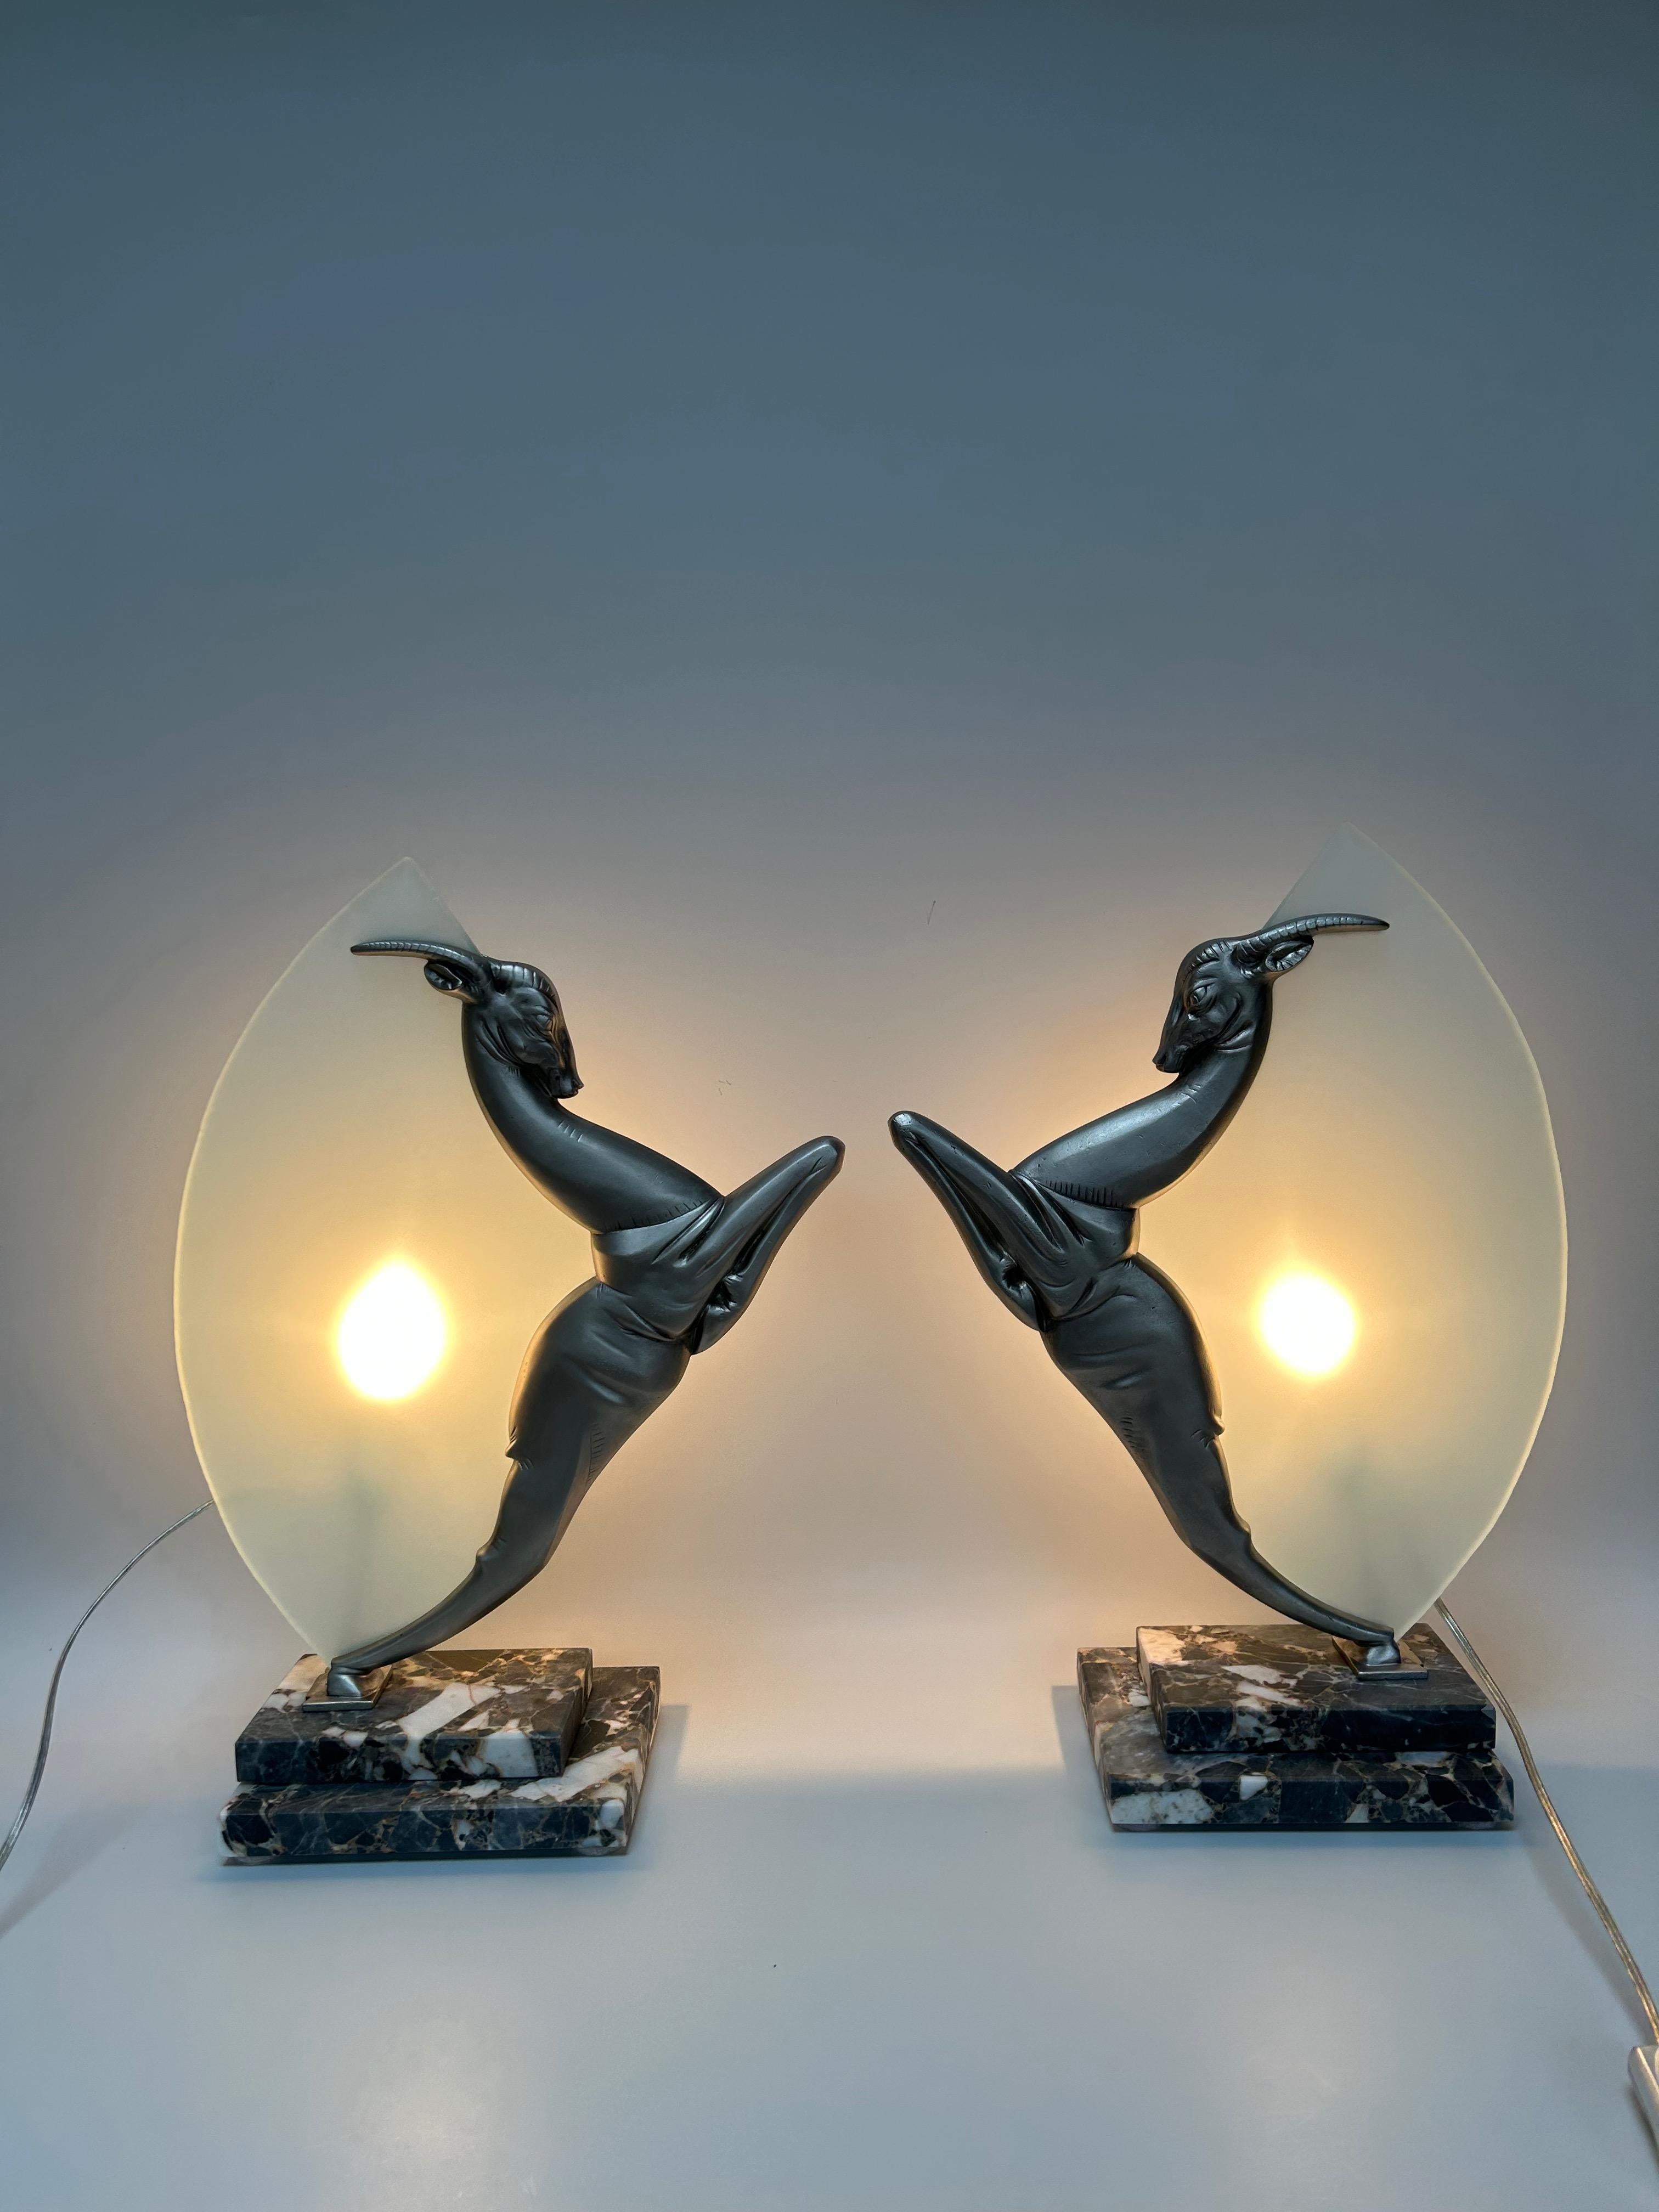 Pair of art deco lamps circa 1930.
Gazelle in silvered bronze on marble base.
Electrified for US, E14 socket, screw bulb.
In perfect condition.
Height: 44.5cm
Width: 31cm
Length: 17.3cm
Depth: 14.3cm
Total weight: 10 kg

Georges-Marius Boretti is a